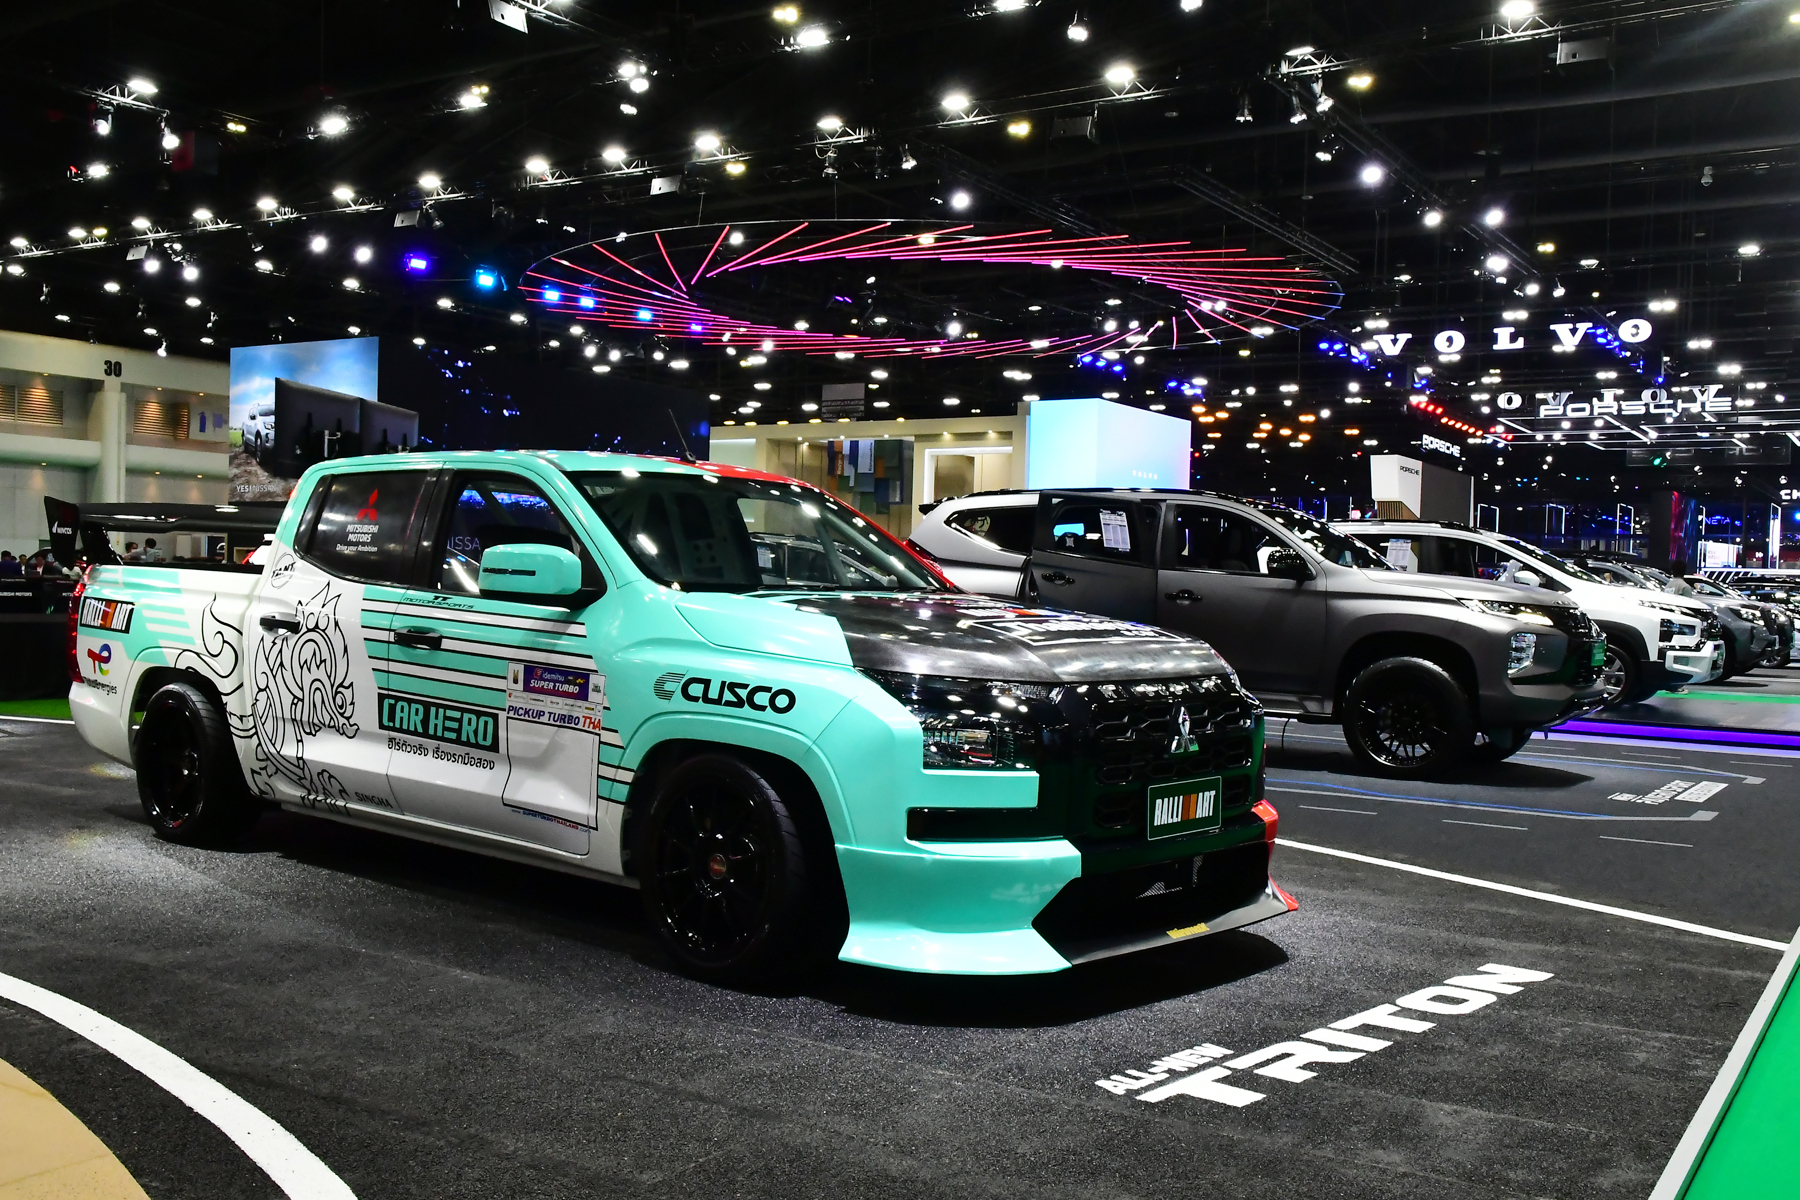 MMTh Motor Show 224